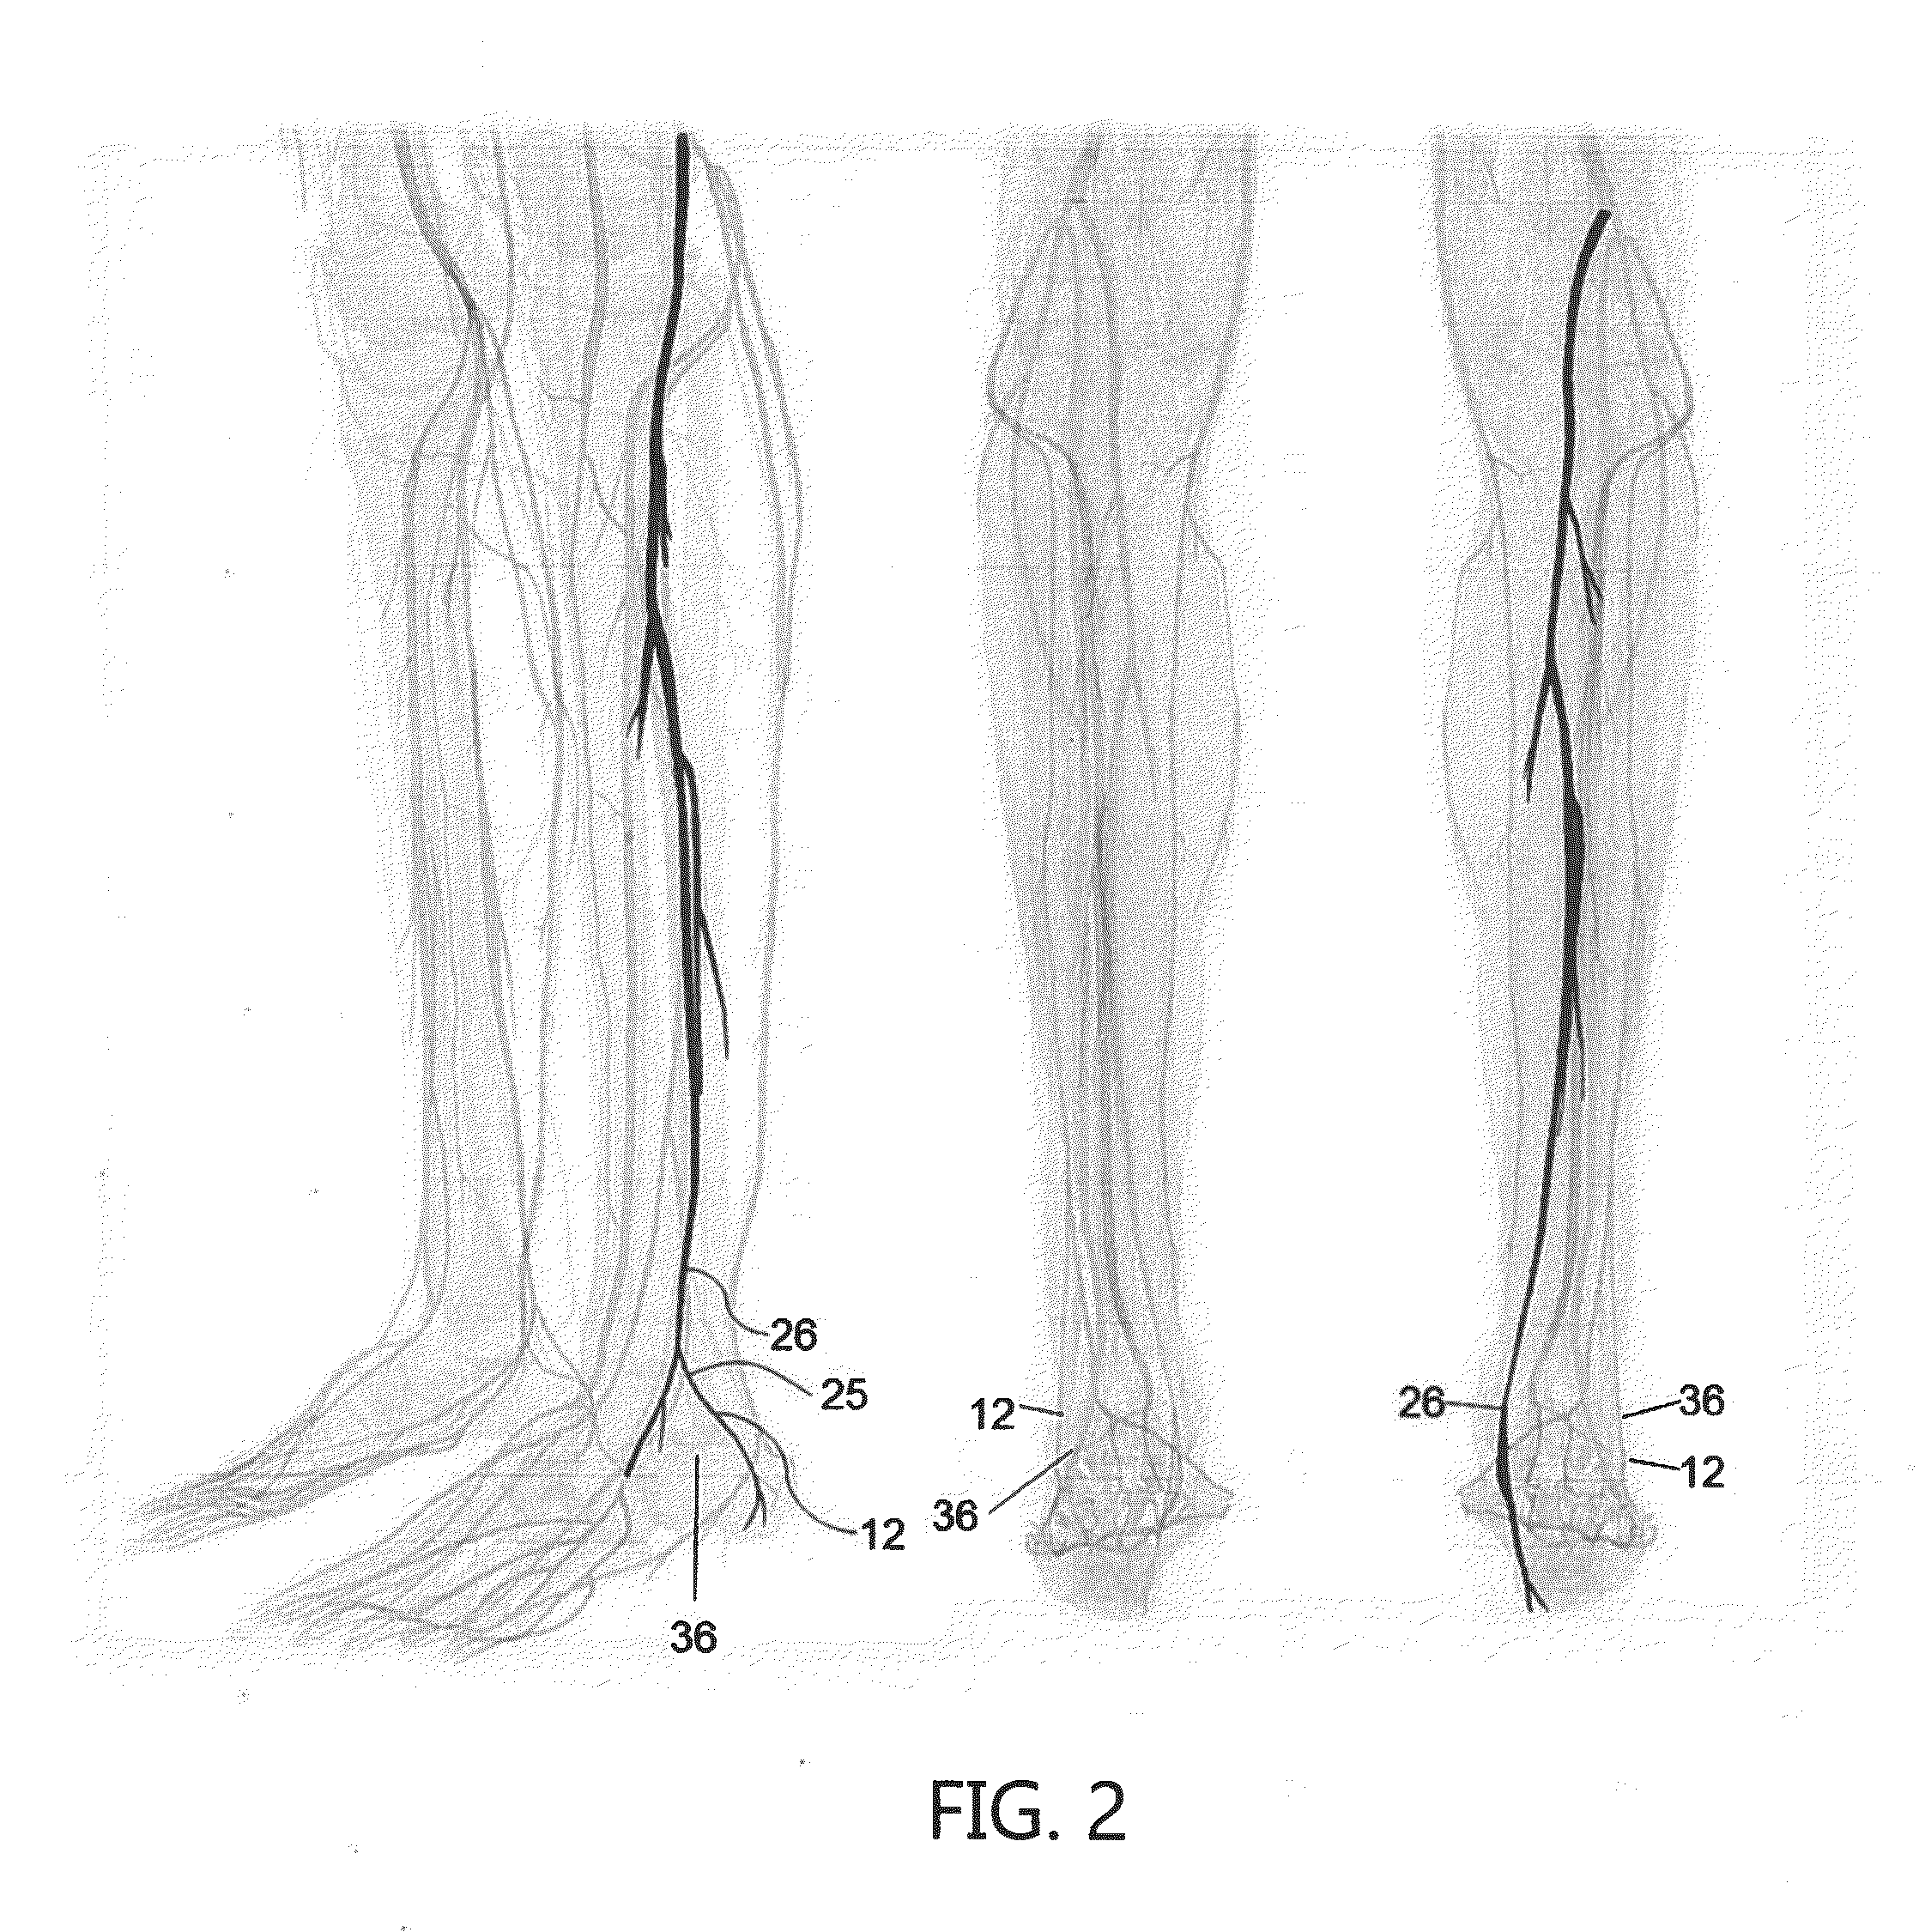 Apparatus for transcutaneous electrical stimulation of the tibial nerve